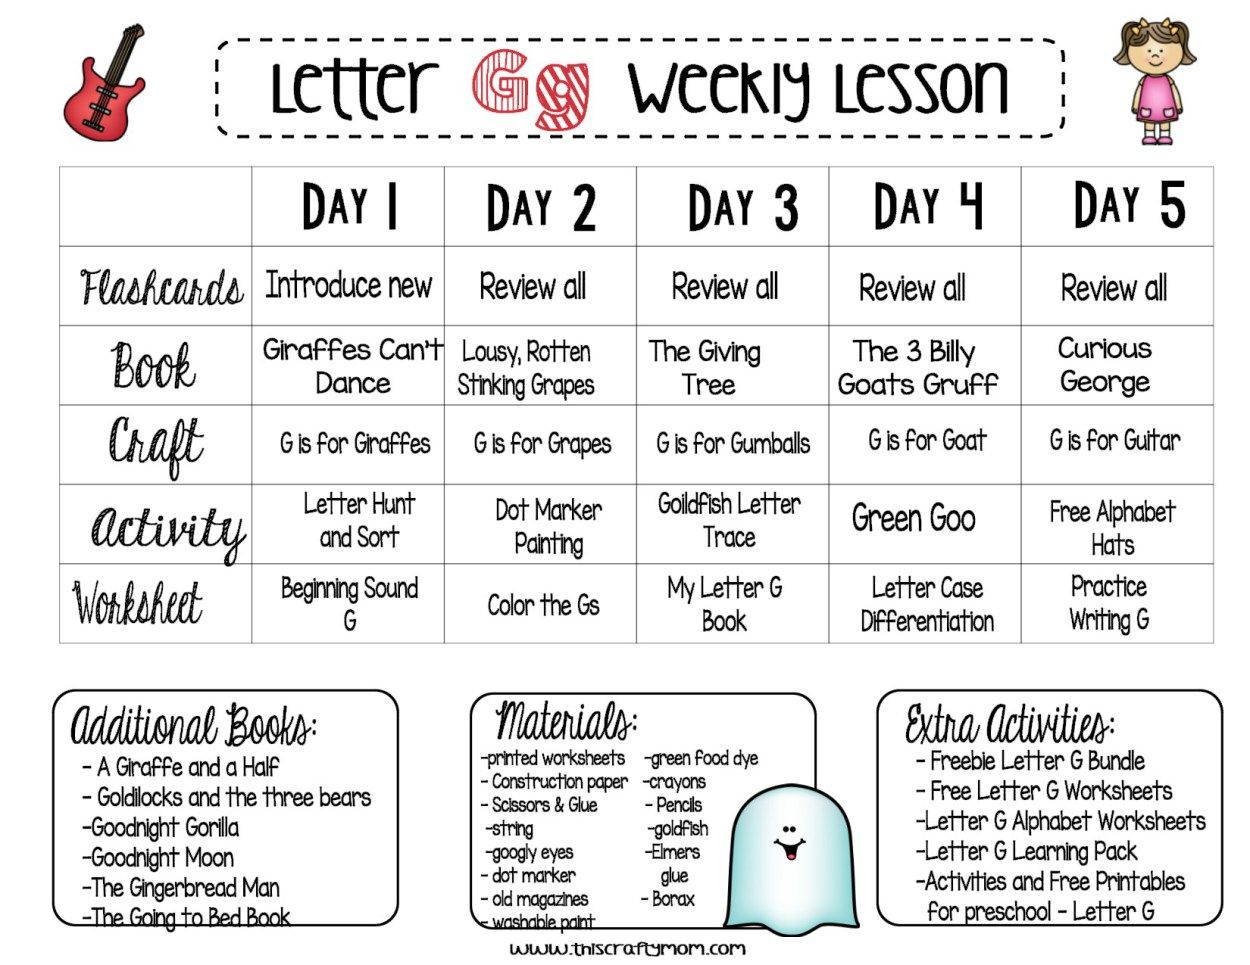 Letter G Free Weekly Preschool Lesson Plan - Letter Of The